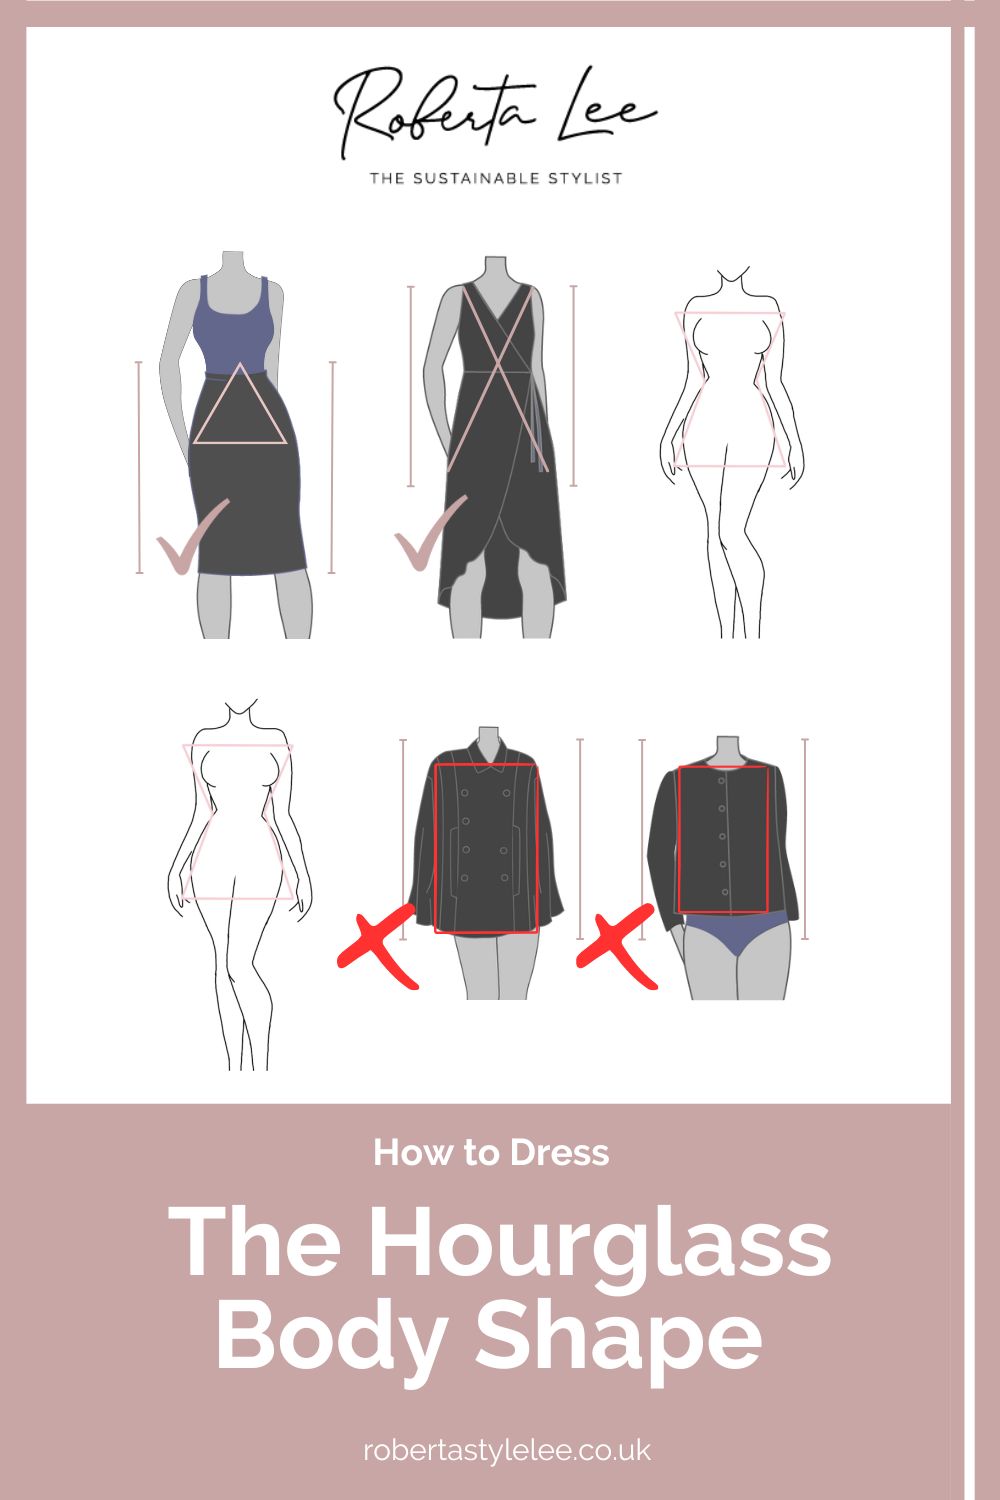 Hourglass Body Shape Guide - Roberta Lee - The Sustainable Stylist